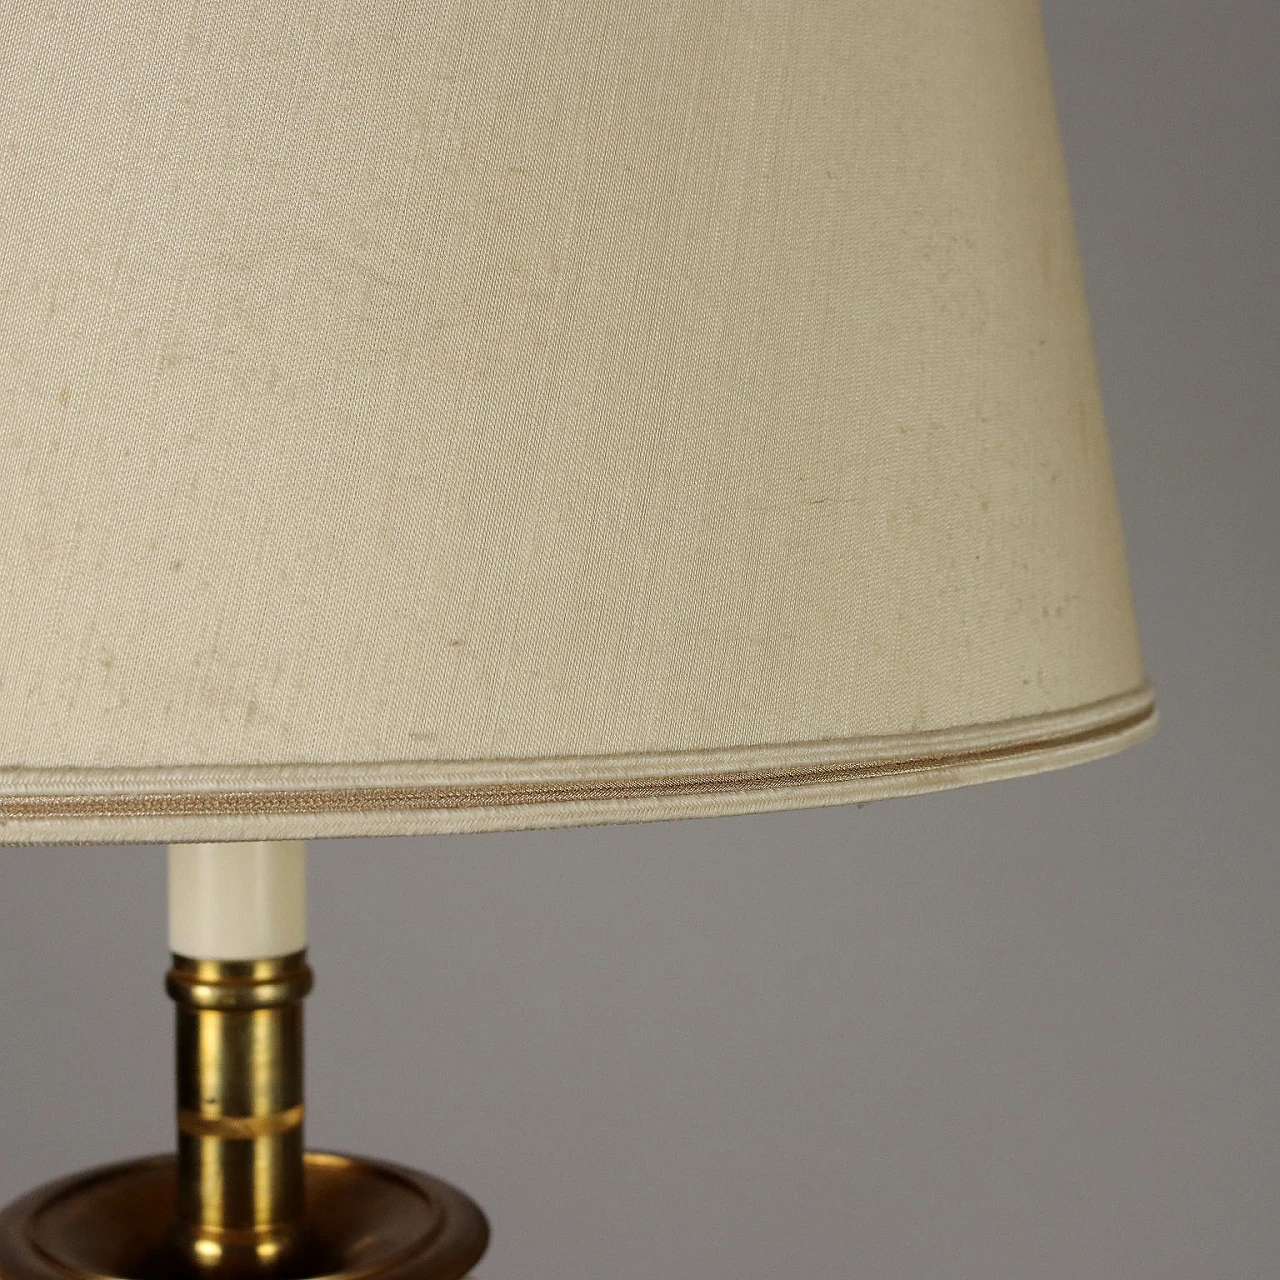 Floor lamp with brass stem and fabric lampshade, 19th century 5